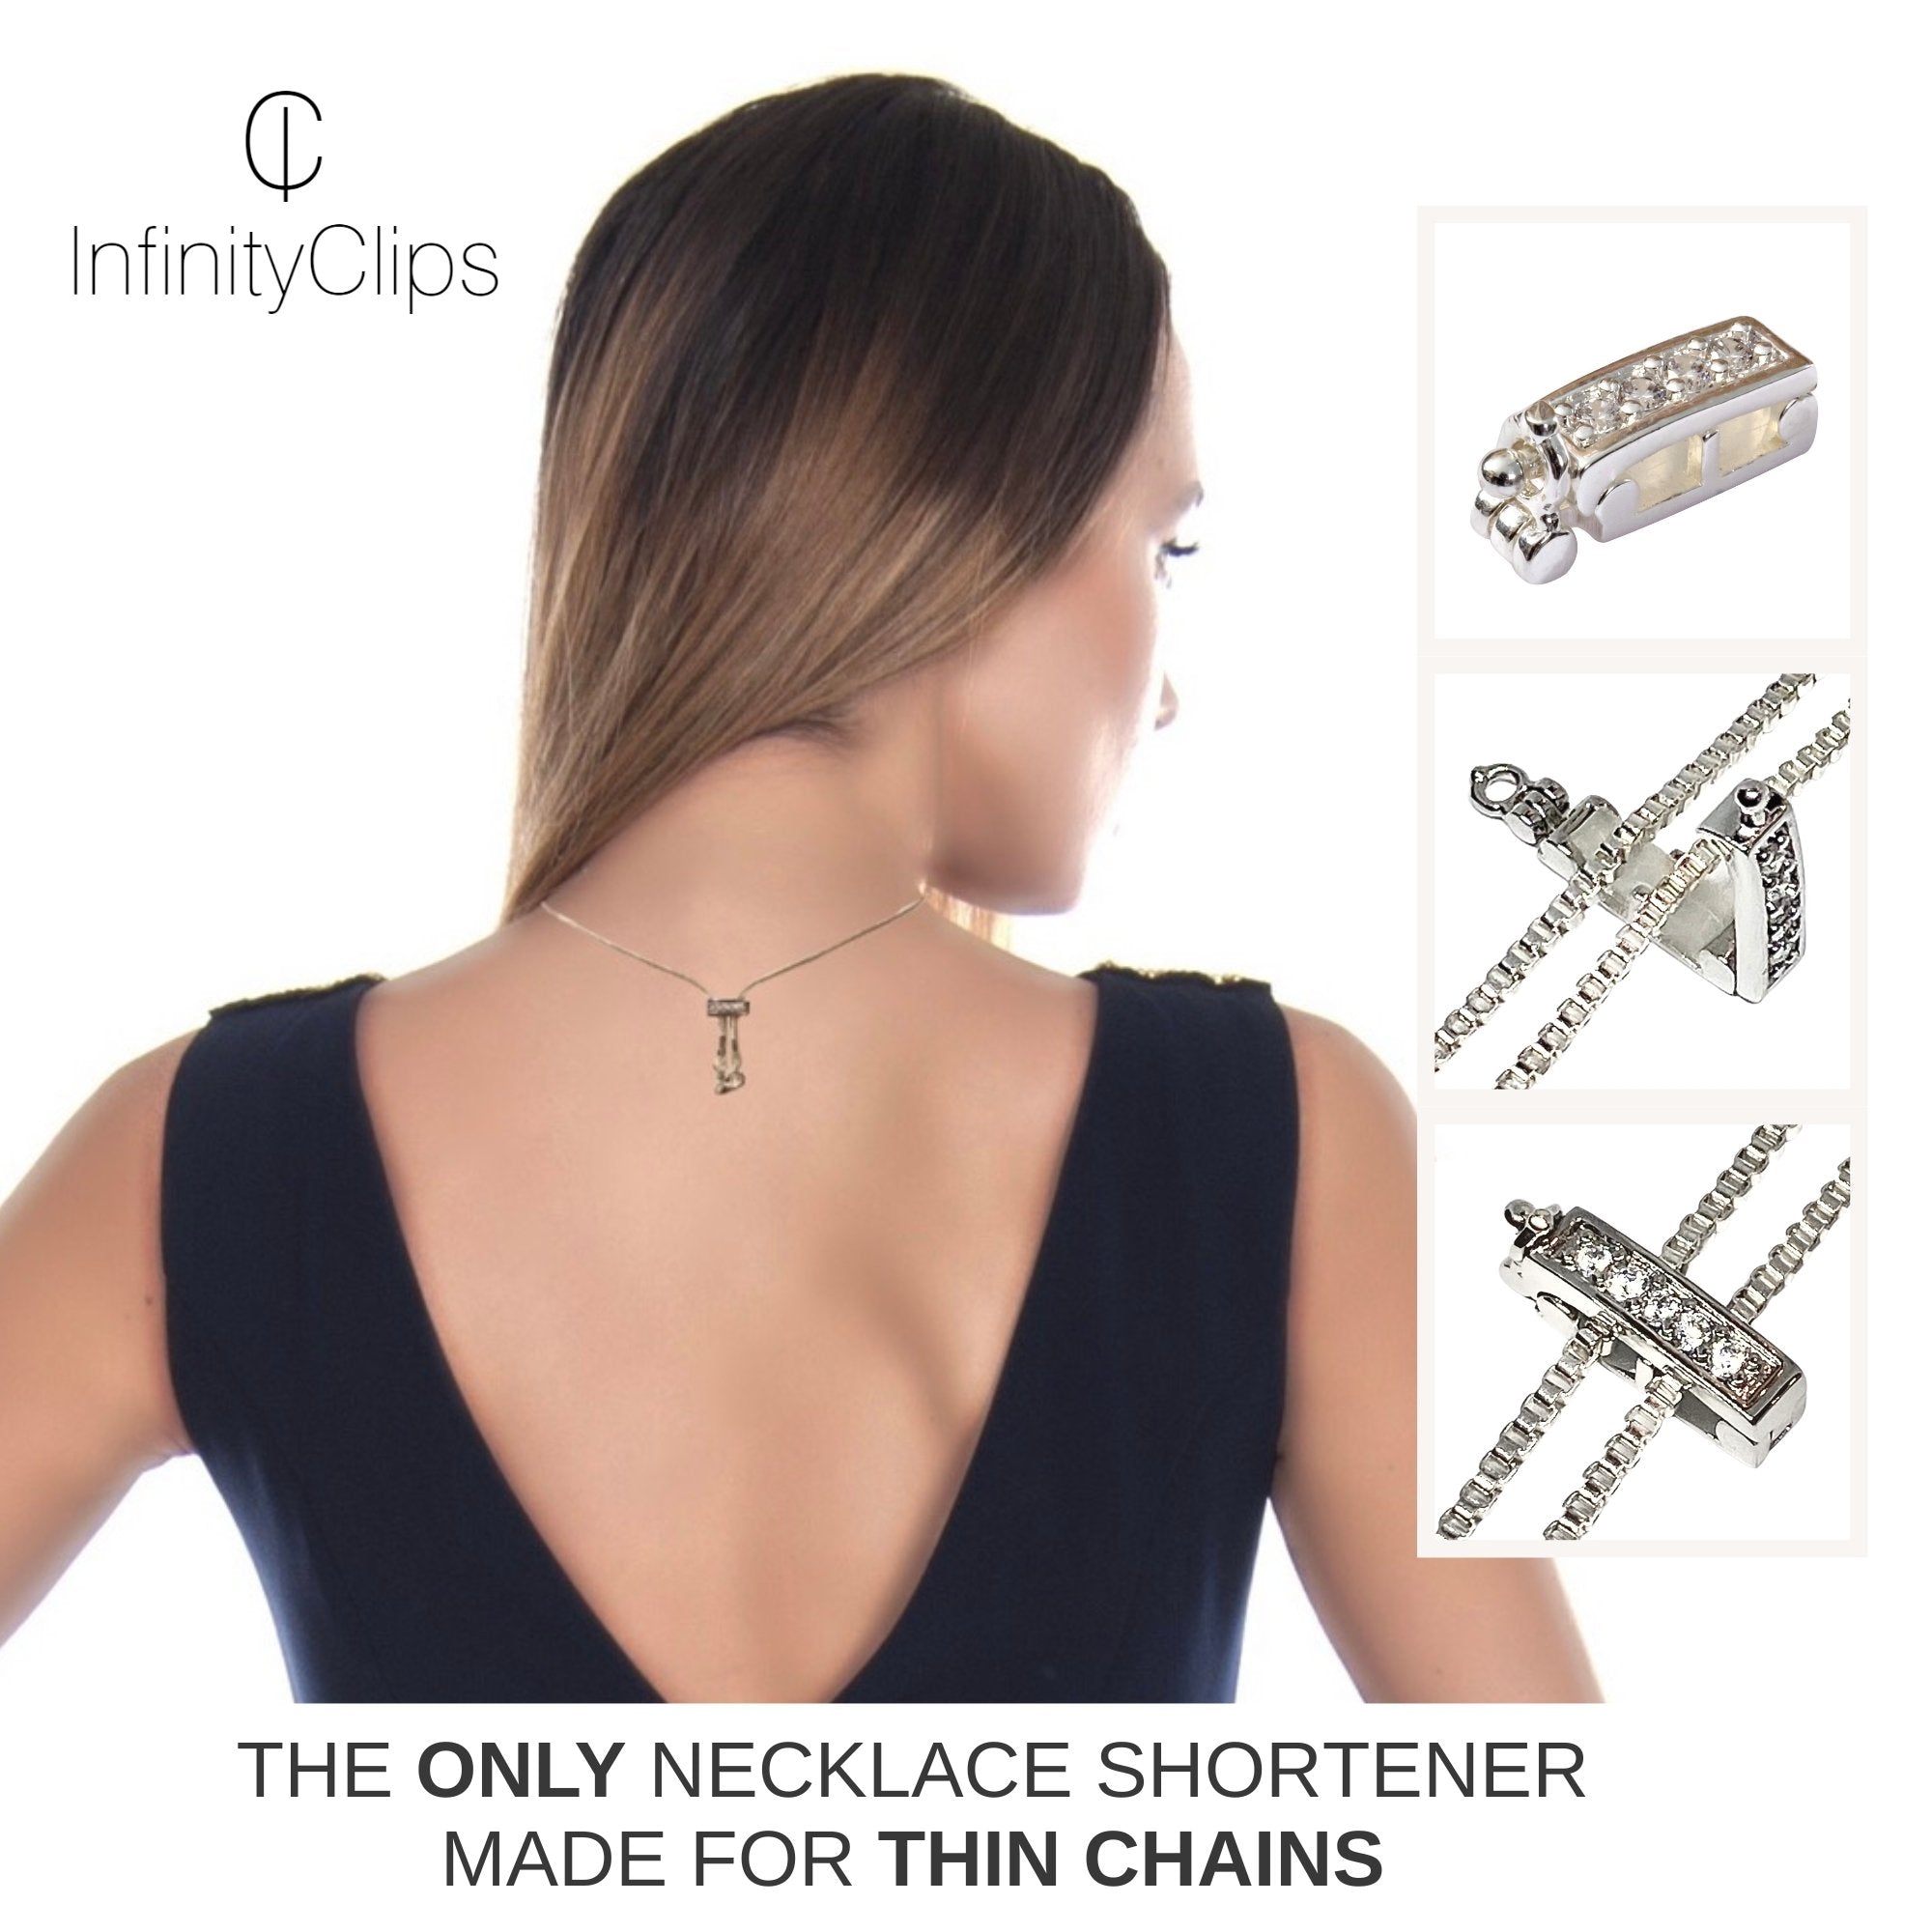 Small Classic Necklace Shortener | InfinityClips Silver